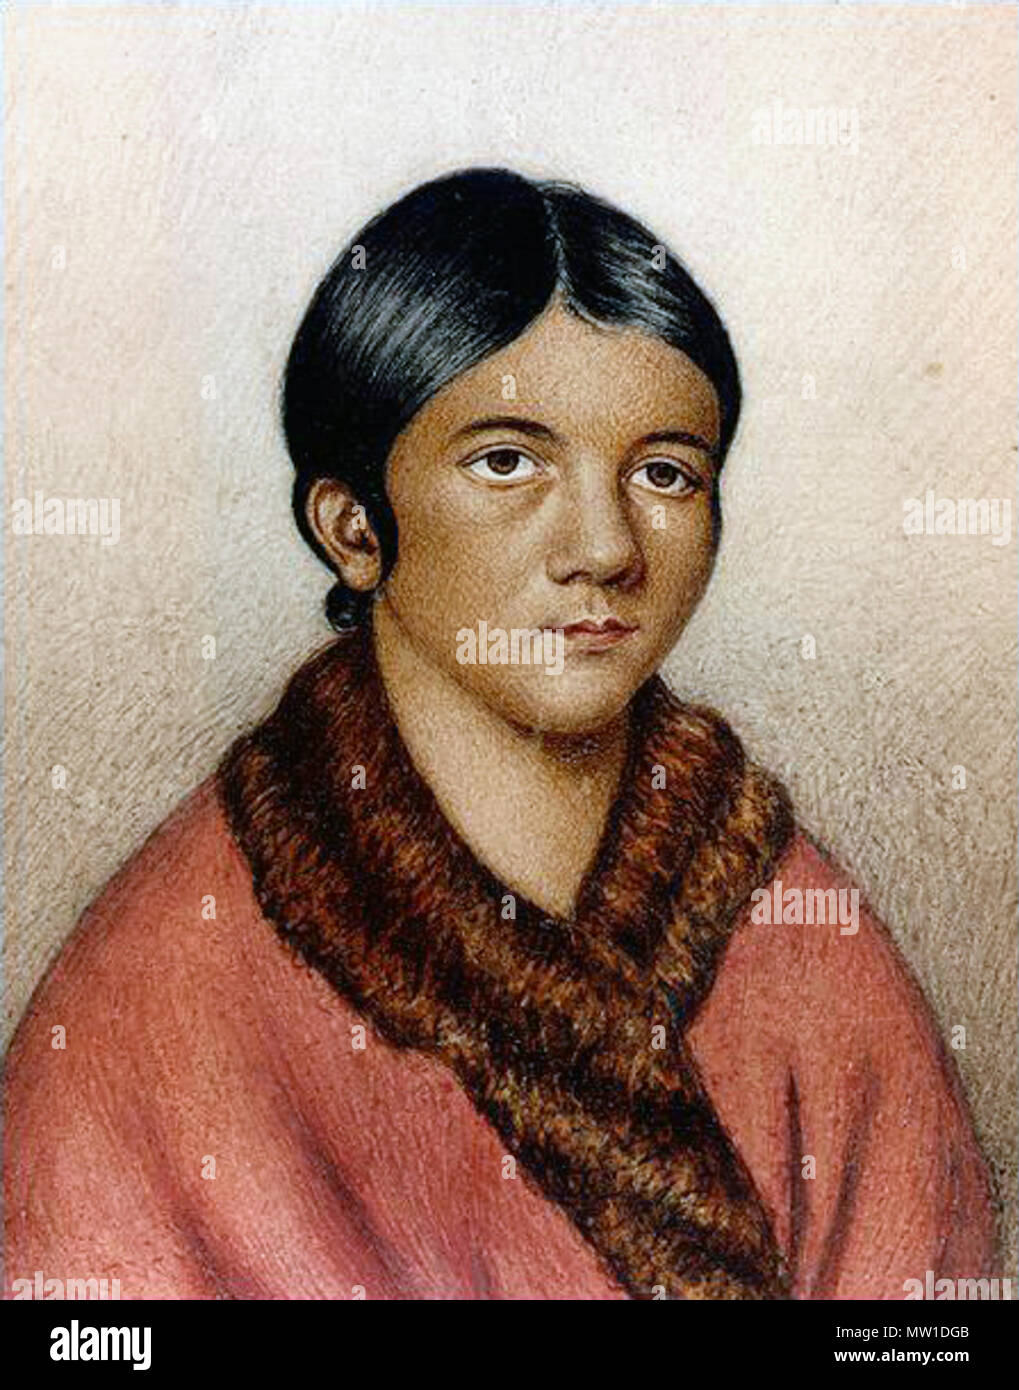 . English: A miniature portrait titled 'A female Red Indian of Newfoundland' which some sources date to 1841. It is believed to be a portrait of Shanawdithit, a Beothuk woman. Most likely a painted copy of Portrait of Demasduit (Mary March), by Lady Henrietta Hamilton (1819, see File:Demasduit.jpg). Although sometimes attributed to William Gosse, the painter was more likely naturalist Philip Henry Gosse (see also Mullen, Gary R., 'Philip Henry Gosse,' Encyclopedia of Alabama, 26 August 2008, retrieved 9 September 2011) . circa 1841. William Gosse more likely Philip Henry Gosse 554 Shanawdithit Stock Photo